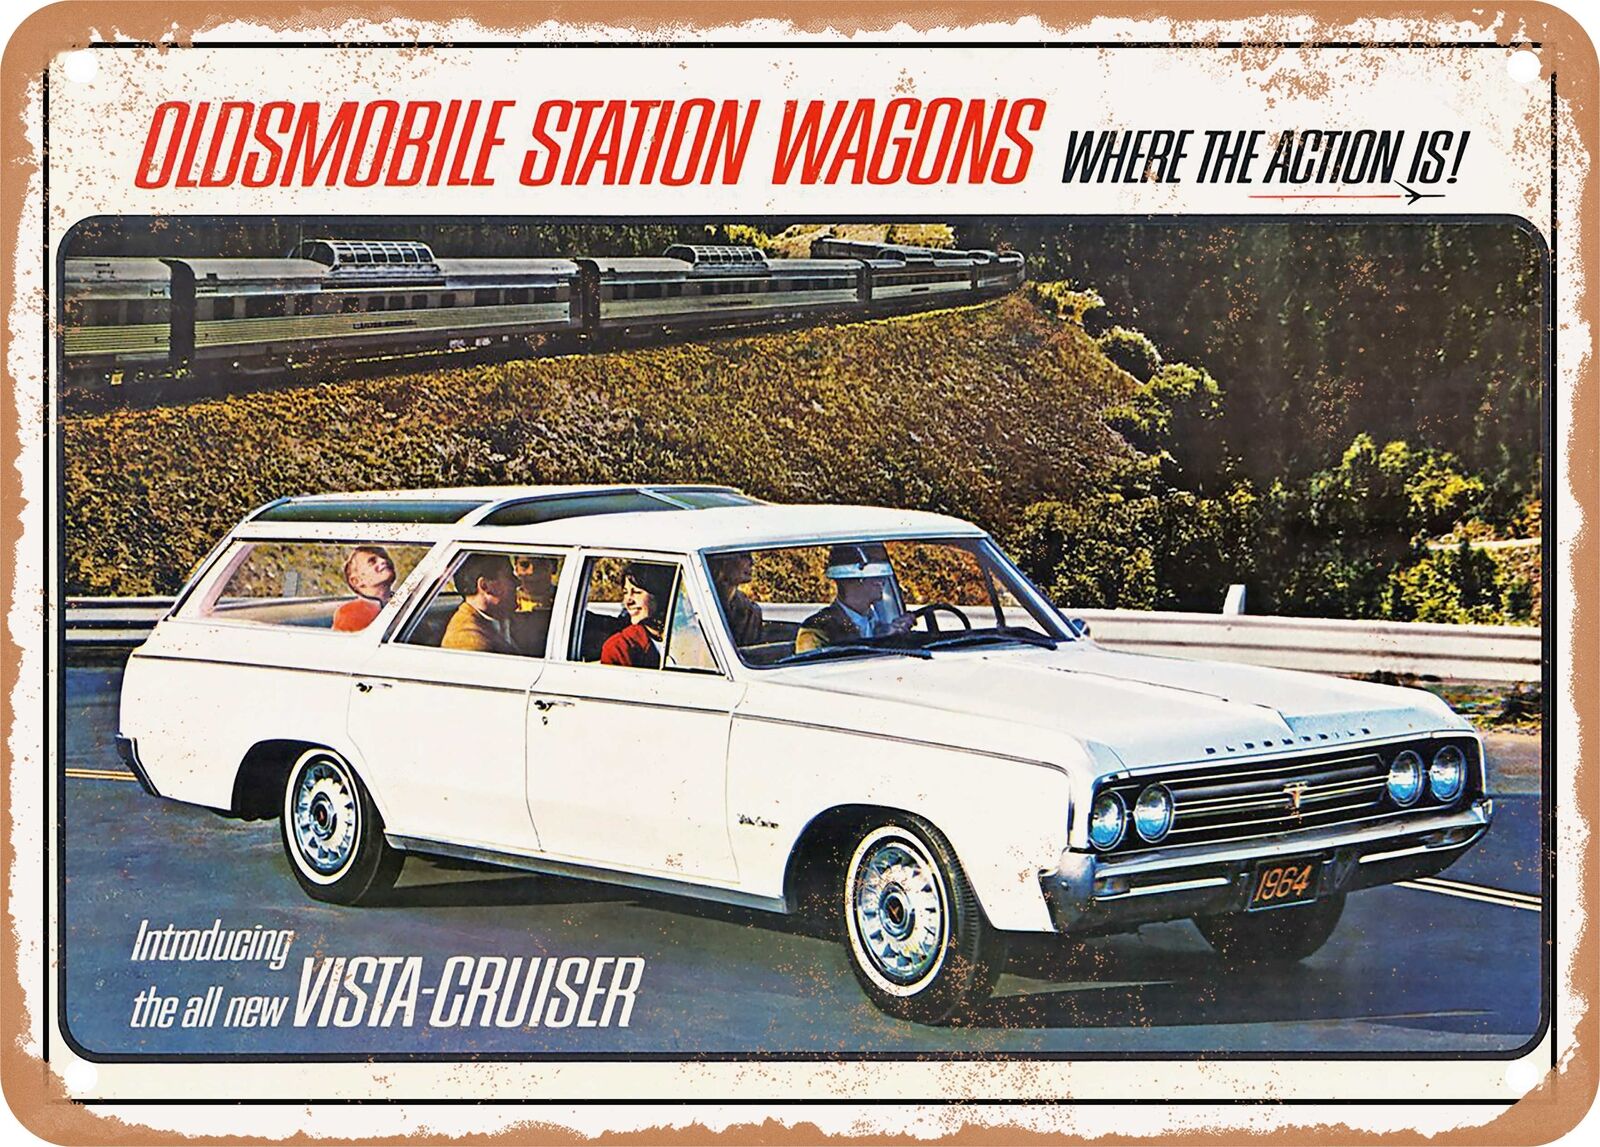 METAL SIGN - 1964 Oldsmobile Vista Cruiser Station Wagon Where the Action is